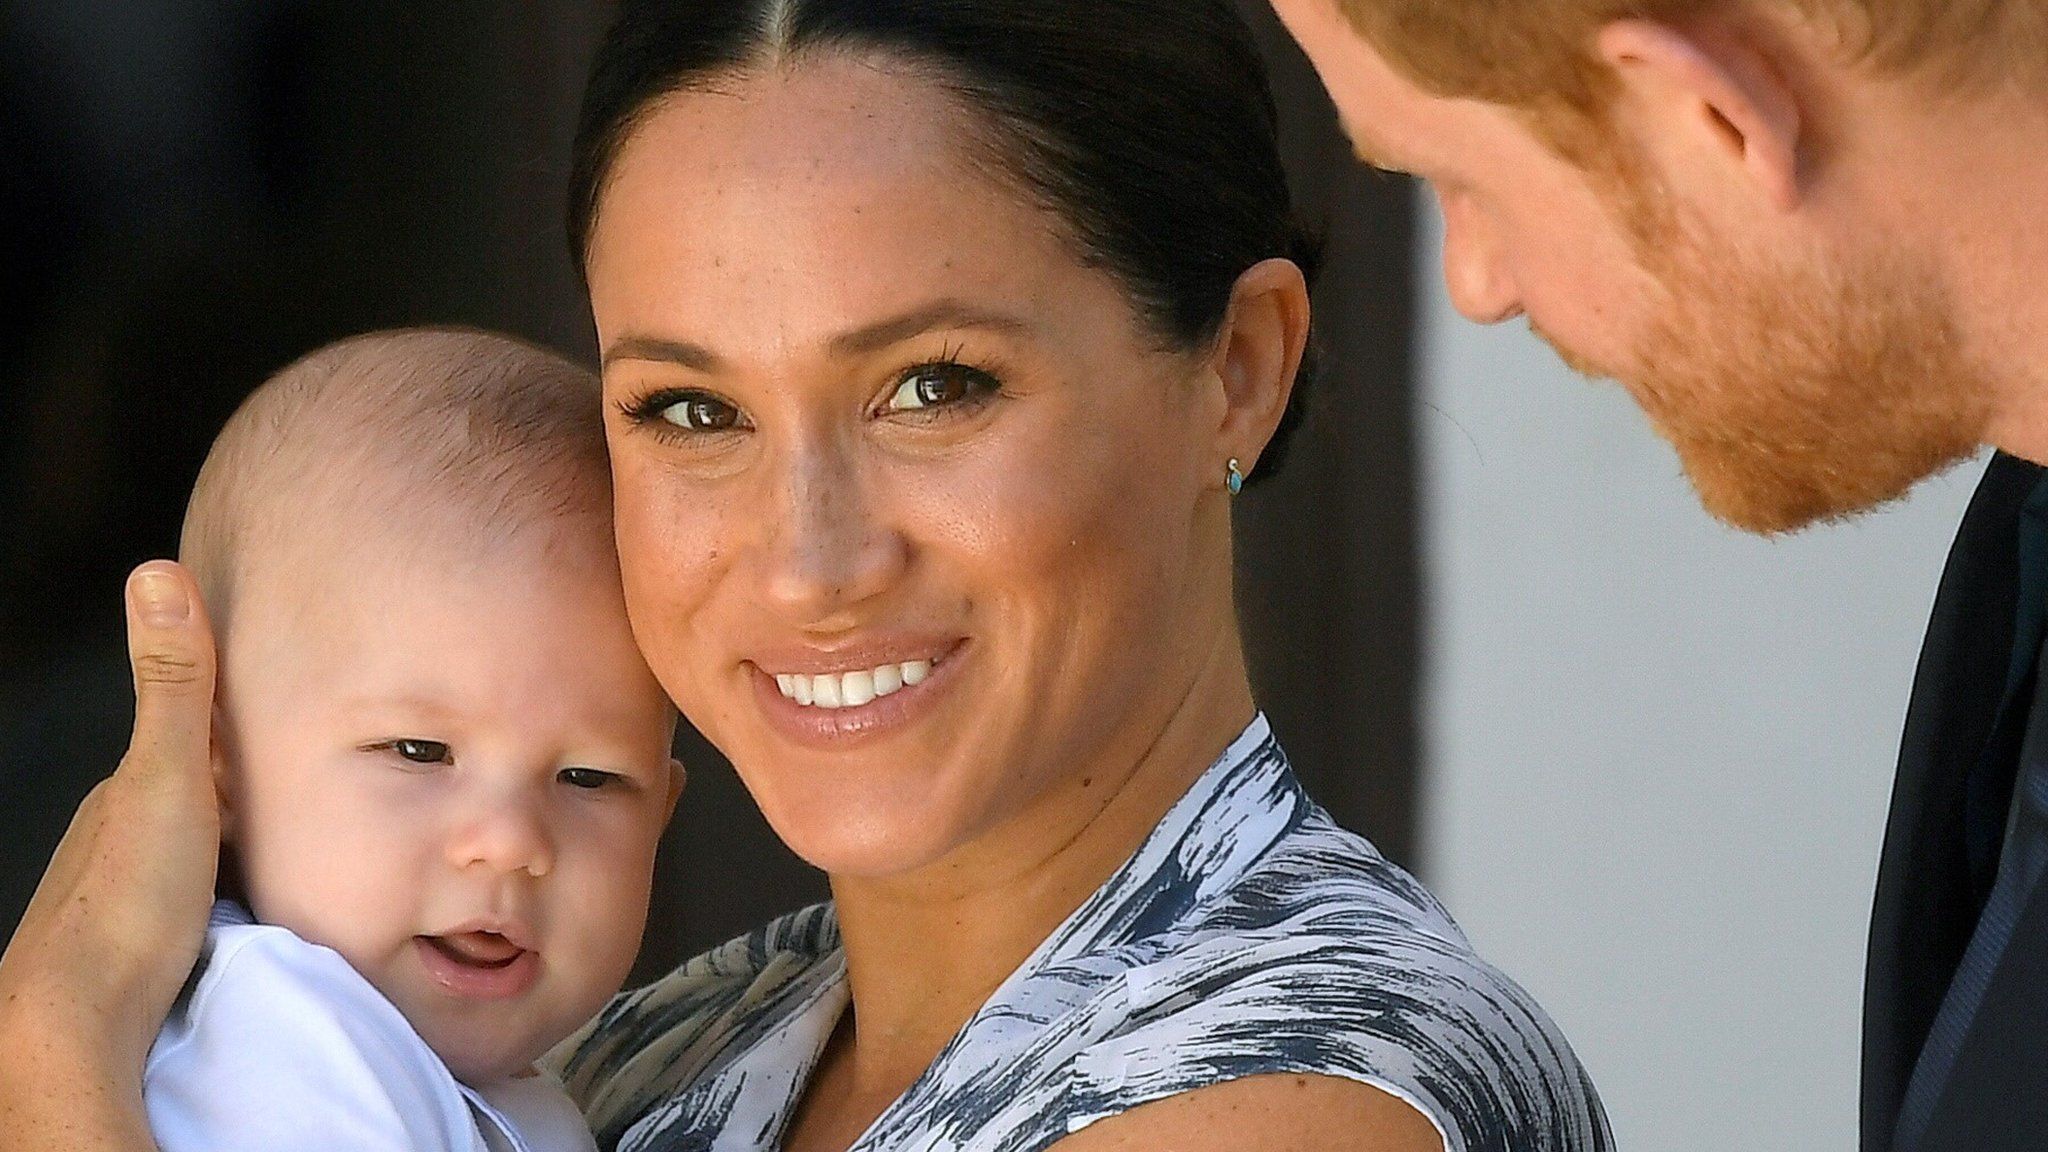 Baby Archie, Meghan and Prince Harry